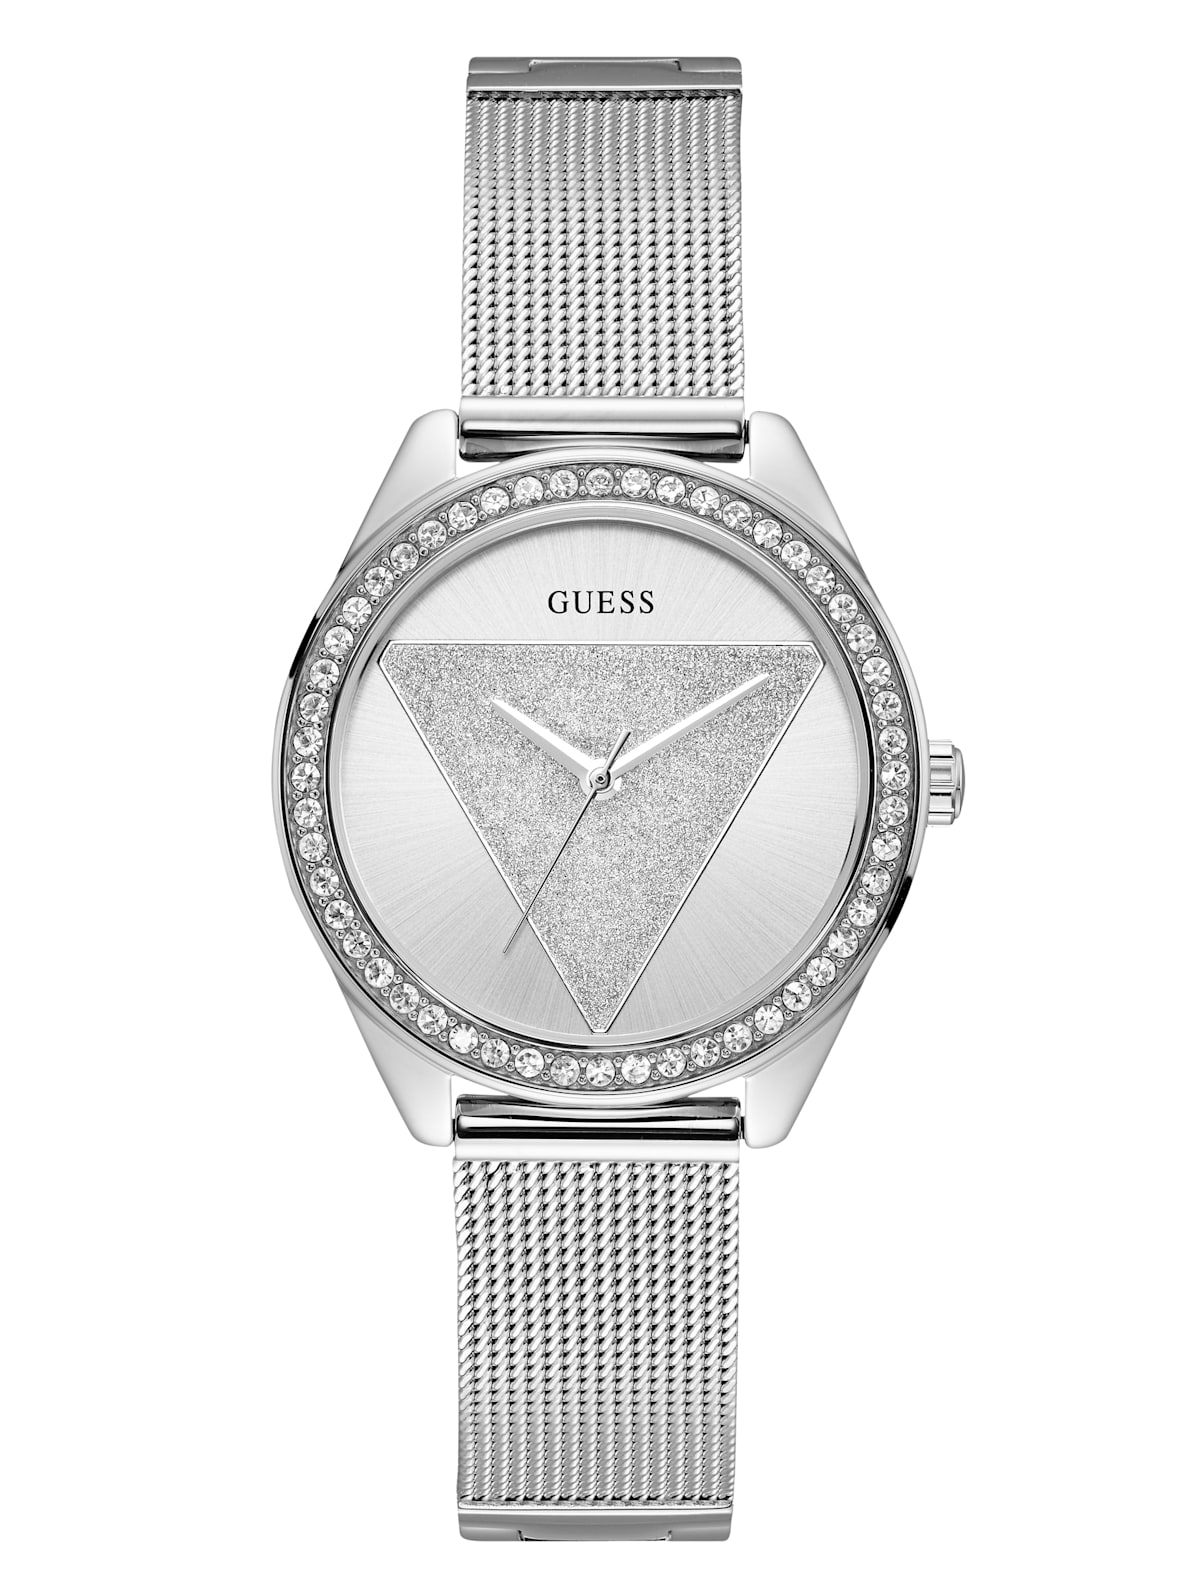 Vlieger diep waterval Silver-Tone Logo Analog Watch | GUESS